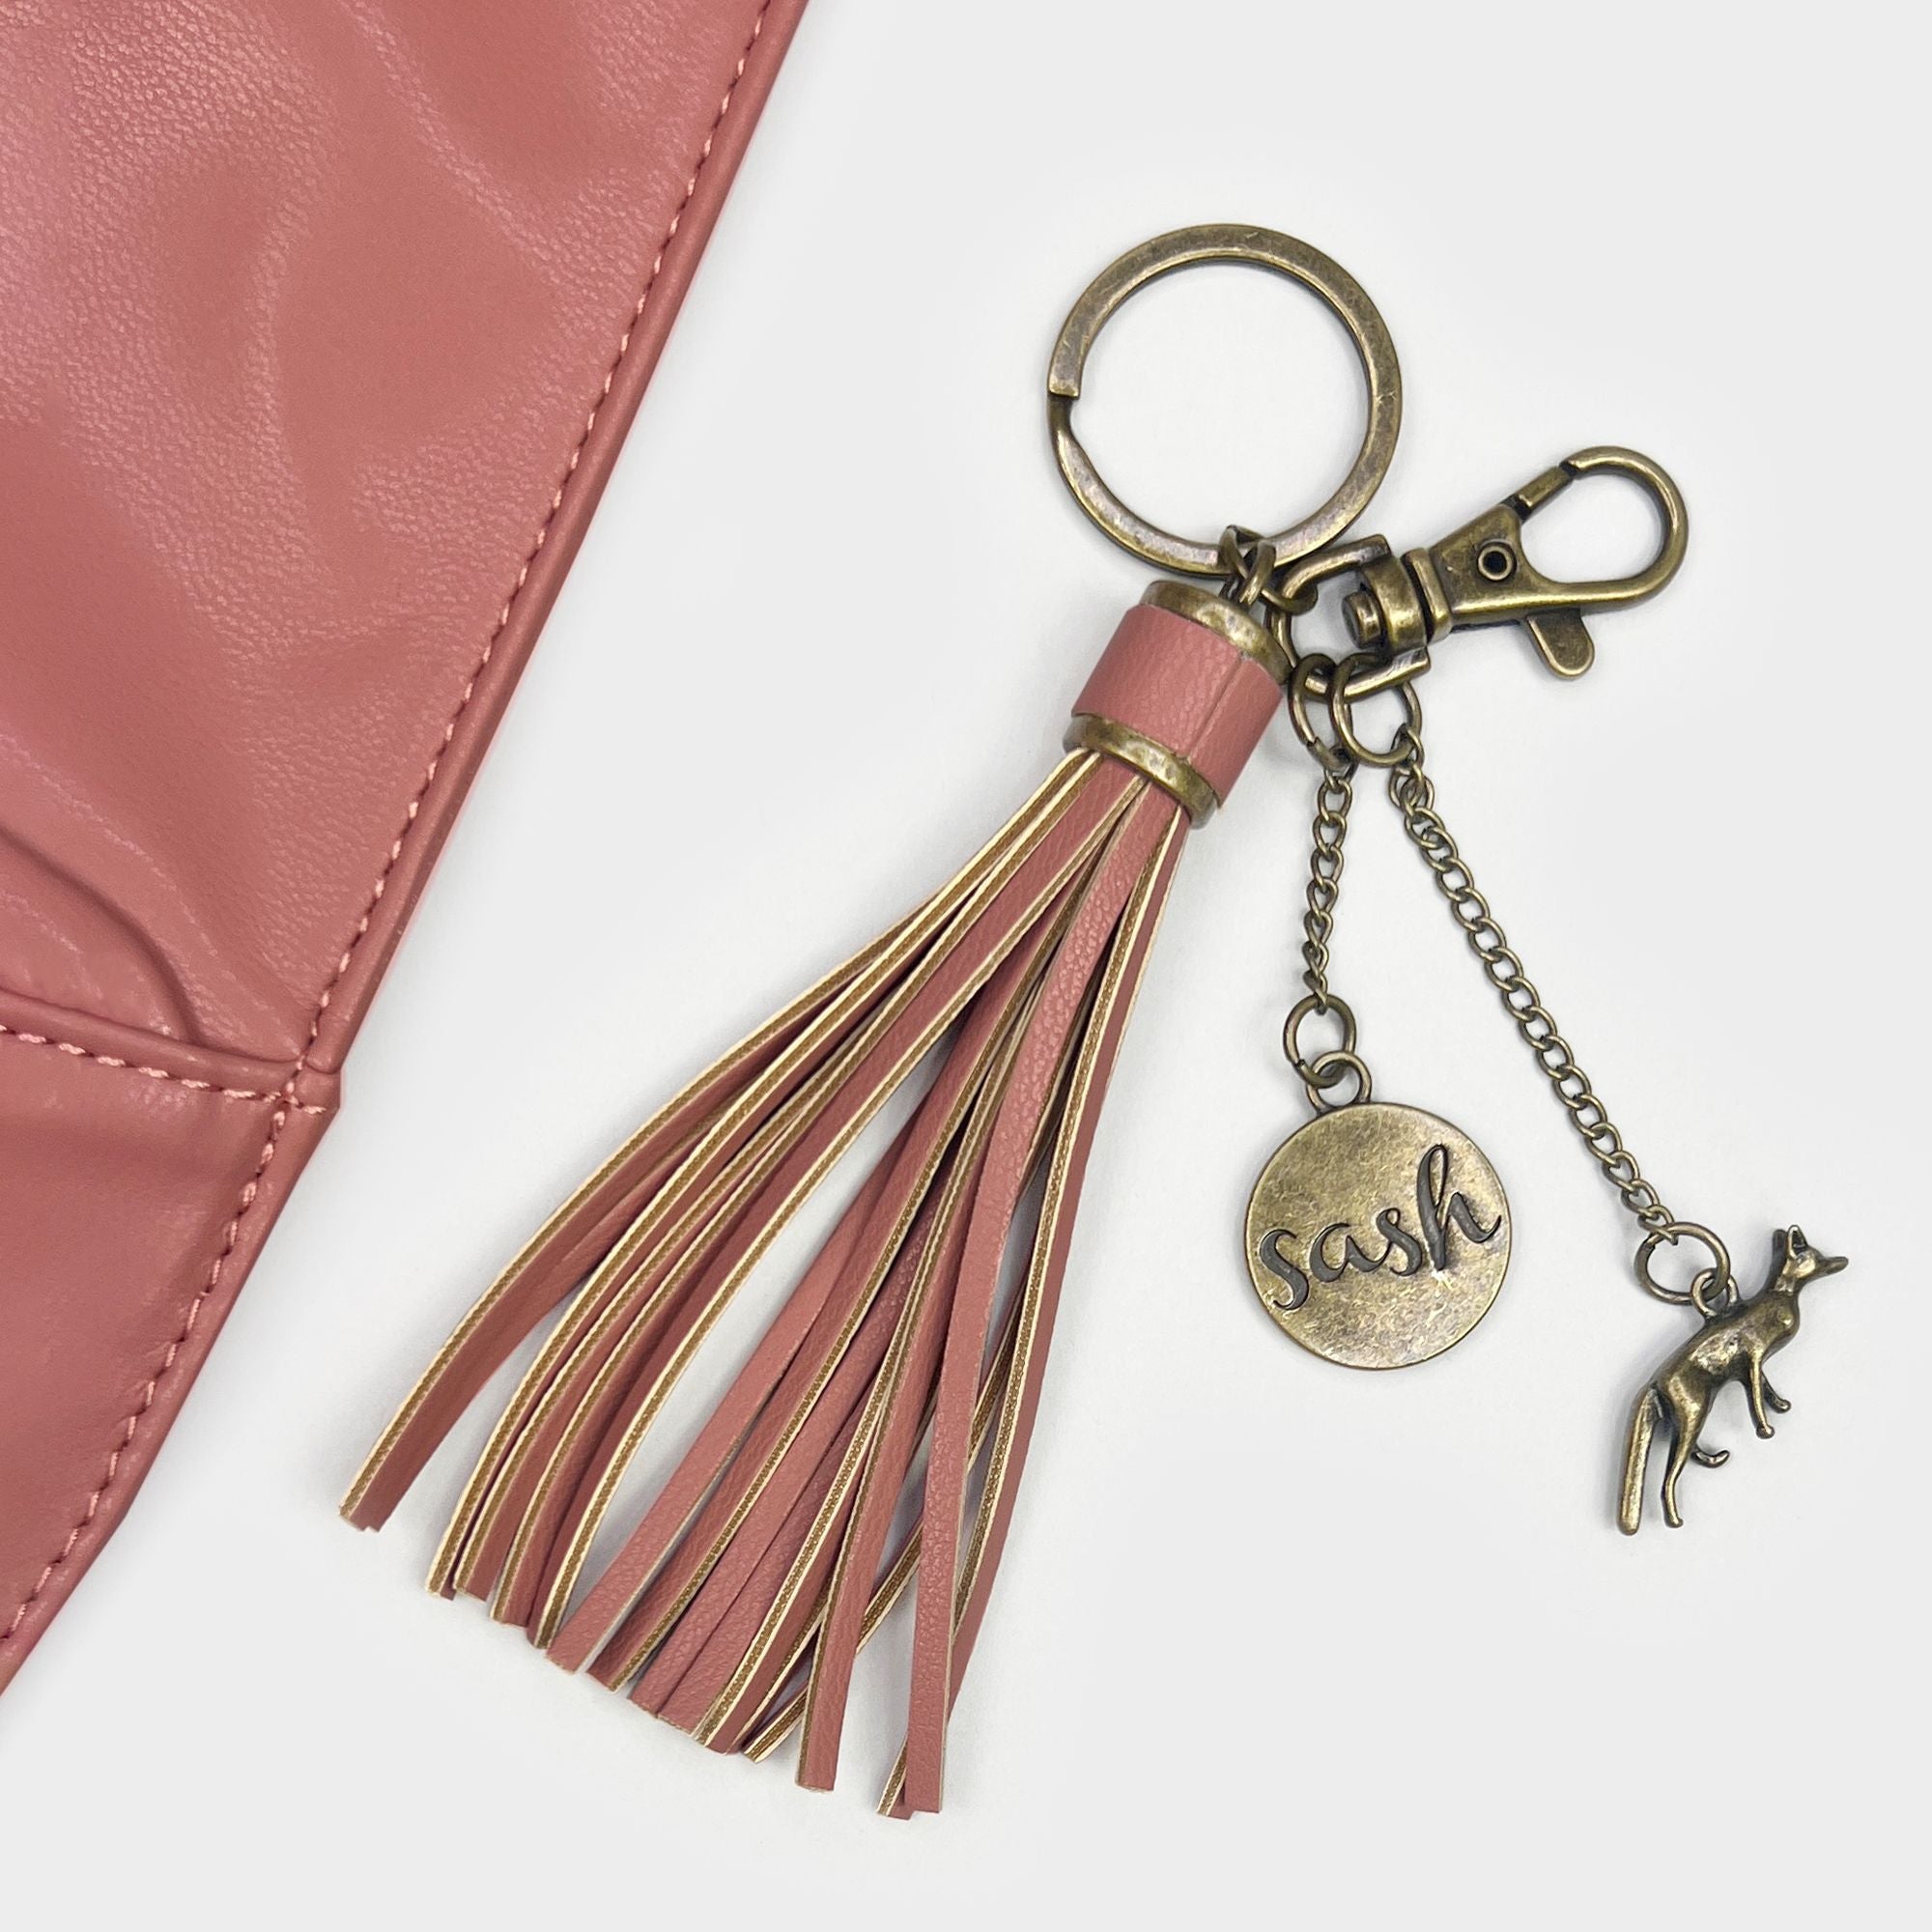 Bee Fox Design Genuine Leather Keychains For Aftermarket Key Fob Stylish  Bag Charms Pendants For Men And Women From Yambags, $2.85